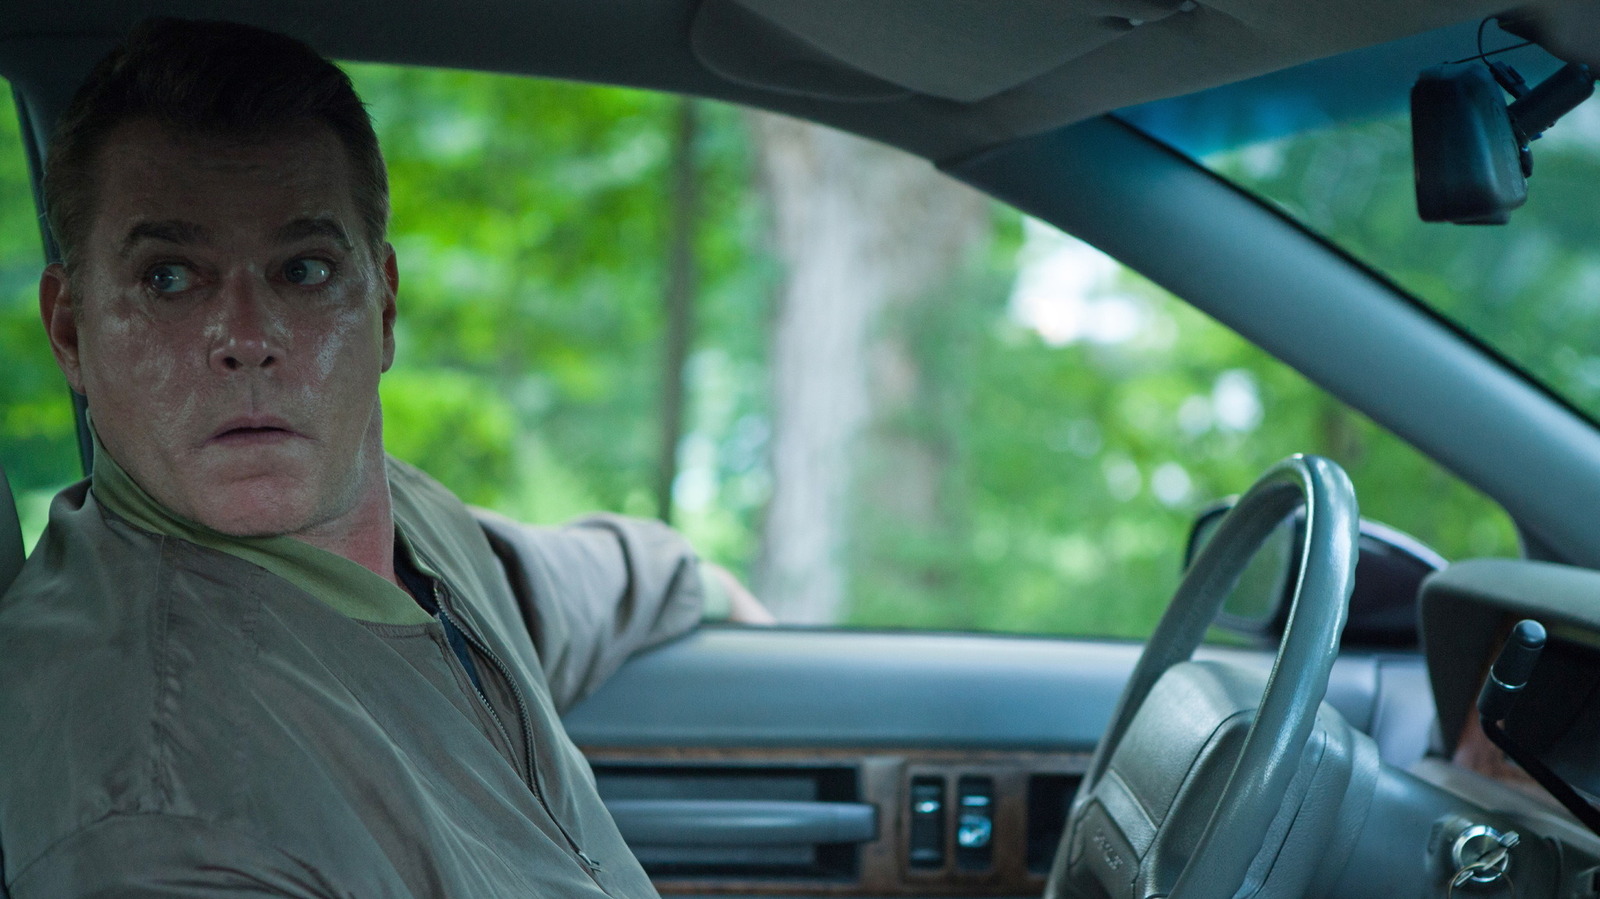 Why The Place Beyond The Pines Director Derek Cianfrances Called Ray Liotta An 'American Treasure'